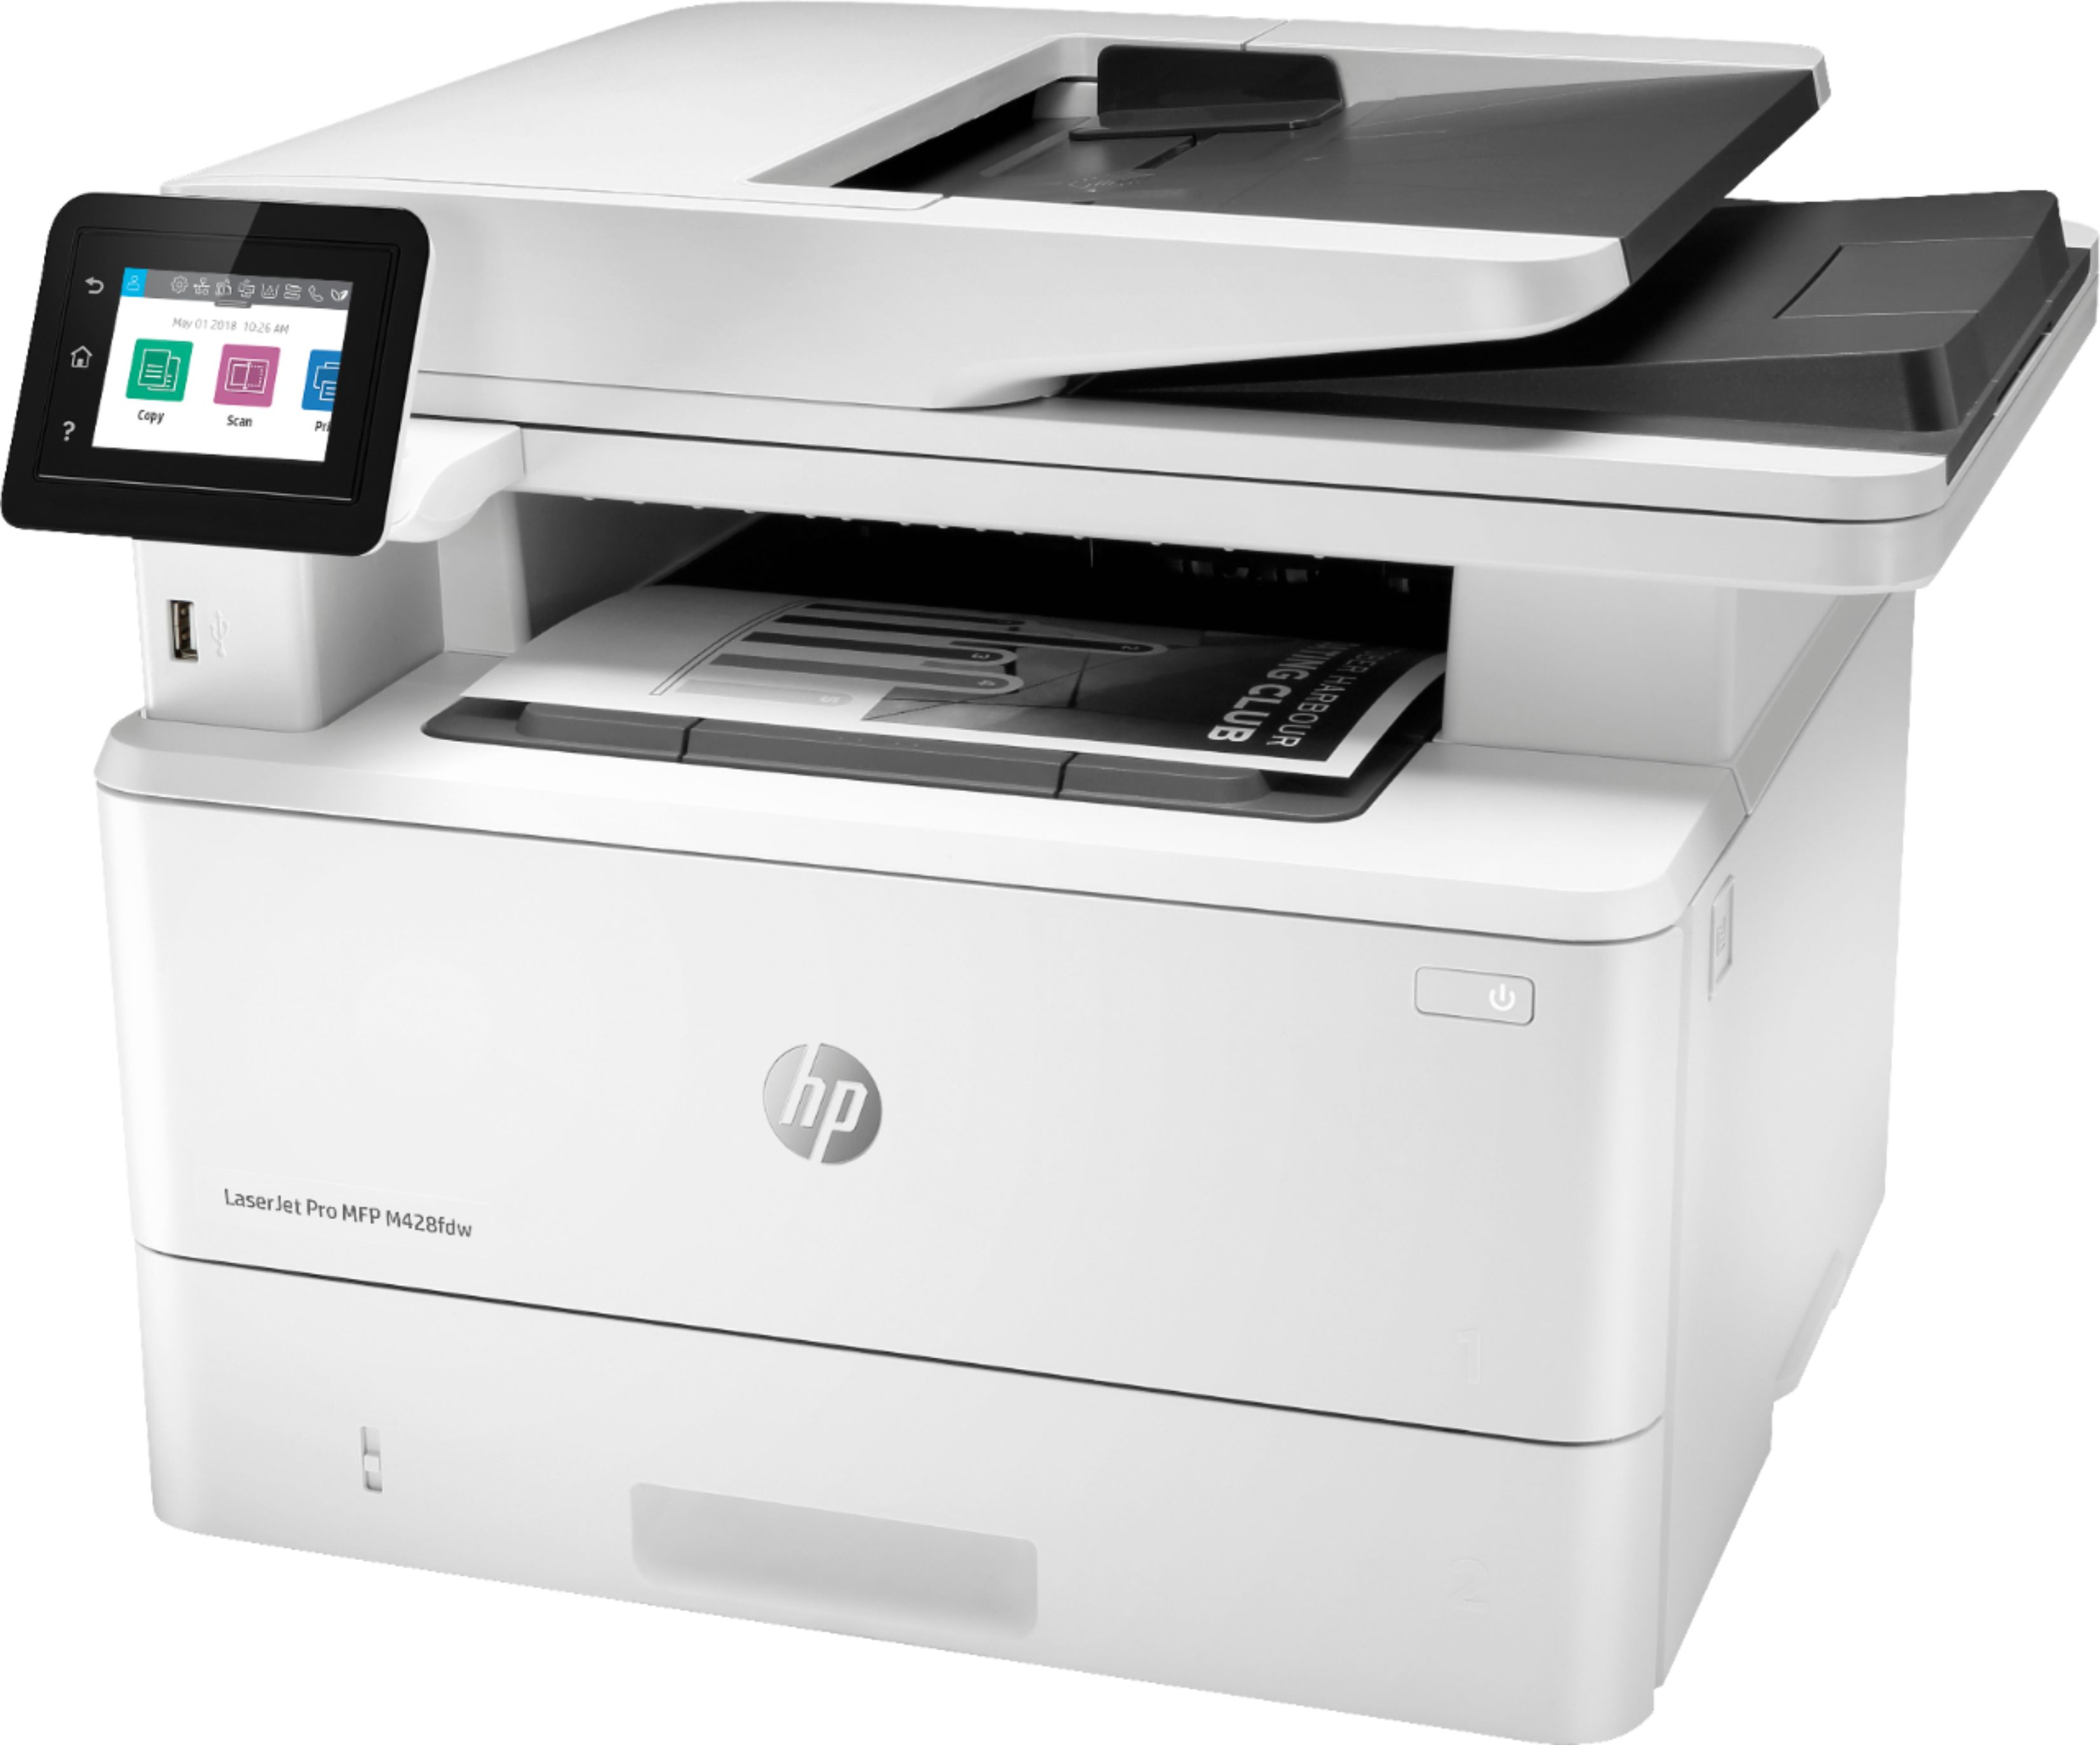 Questions and Answers: HP LaserJet Pro MFP M428fdw Black-and-White All ...